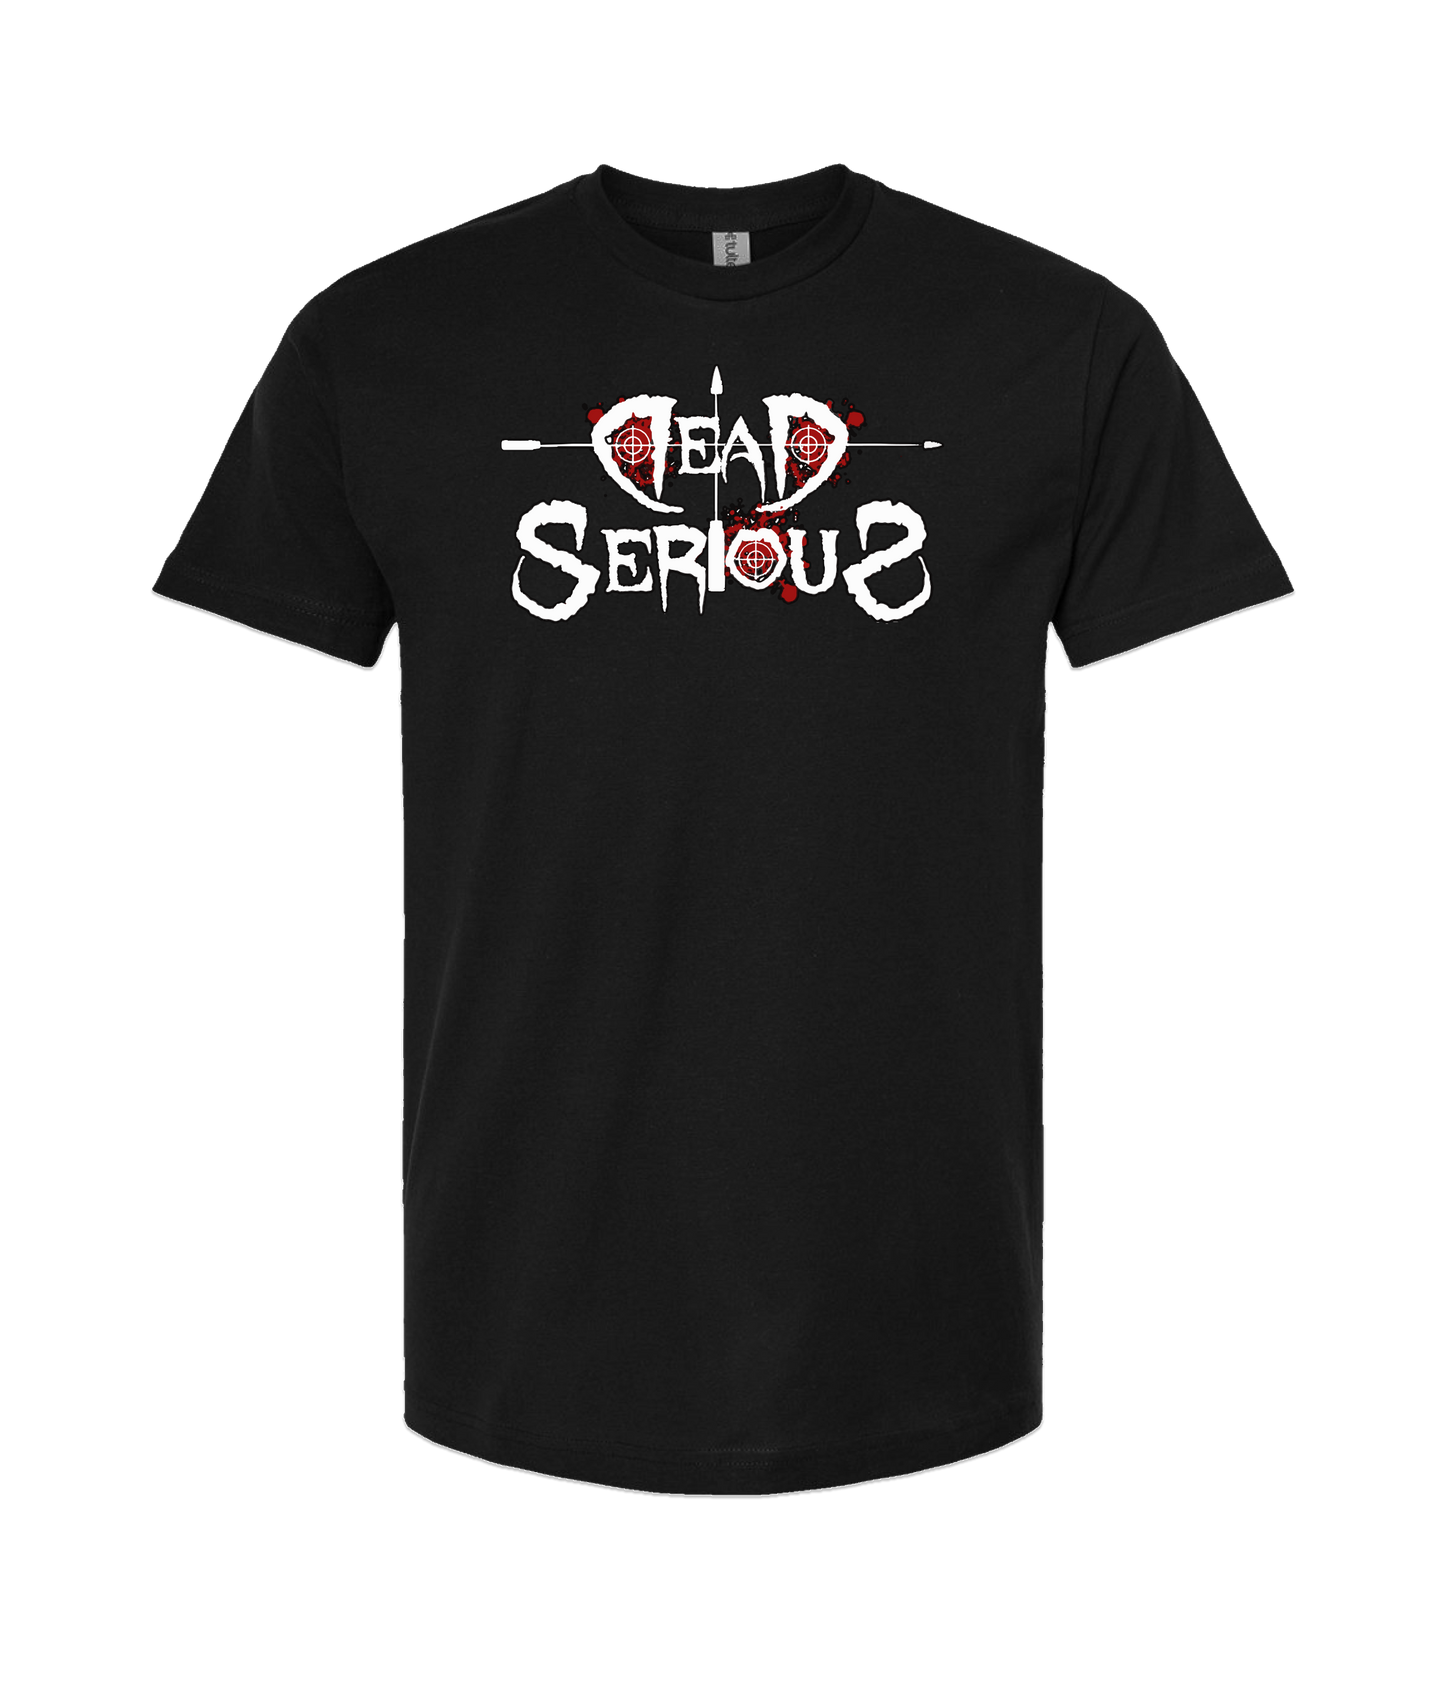 Midwest Monster Promotions - Dead Serious - Black T-Shirt